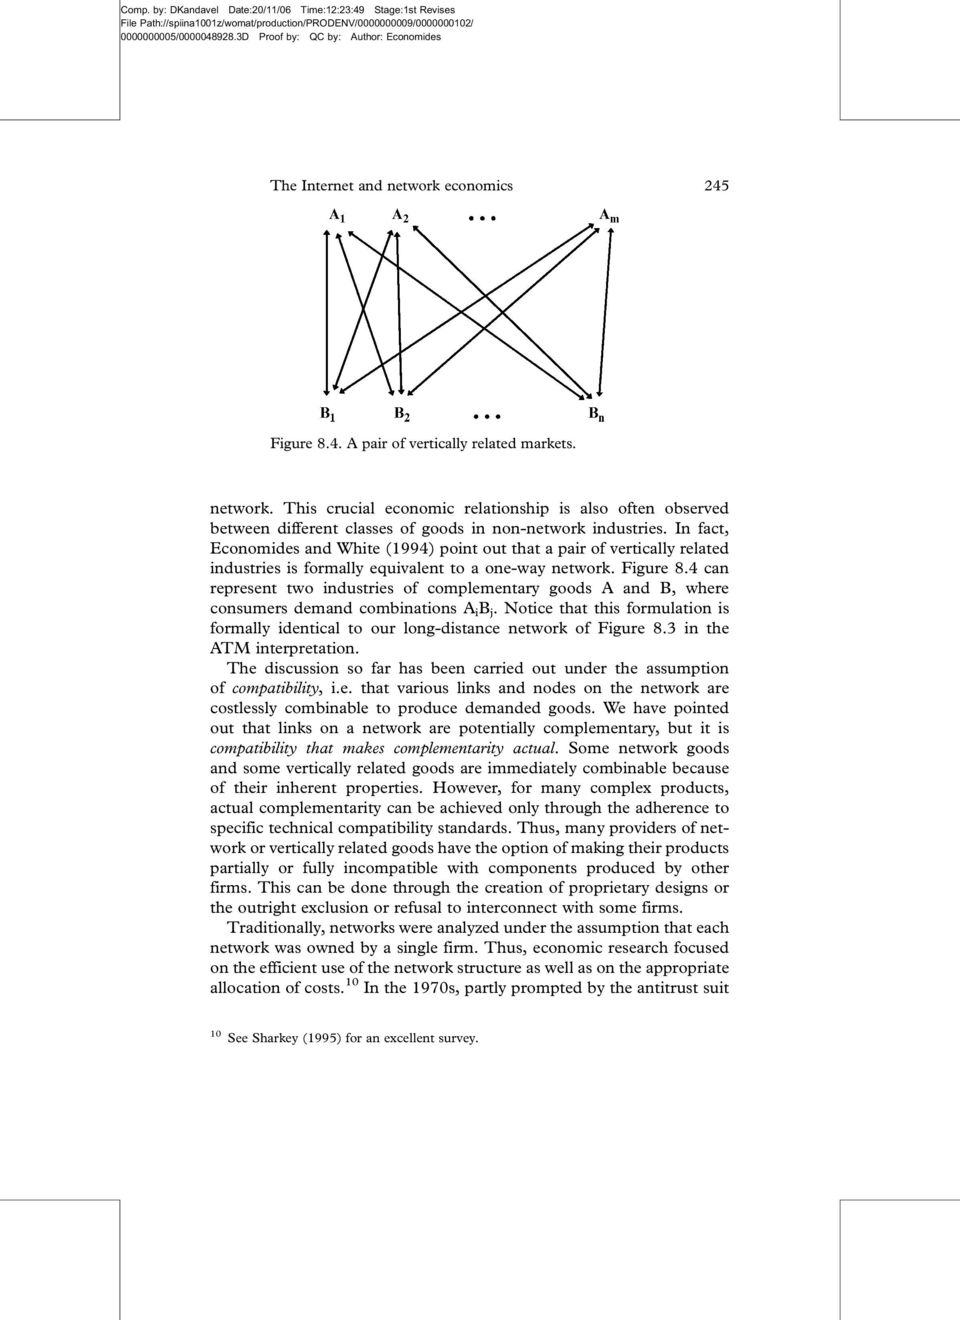 In fact, Economides and White (1994) point out that a pair of vertically related industries is formally equivalent to a one-way network. Figure 8.